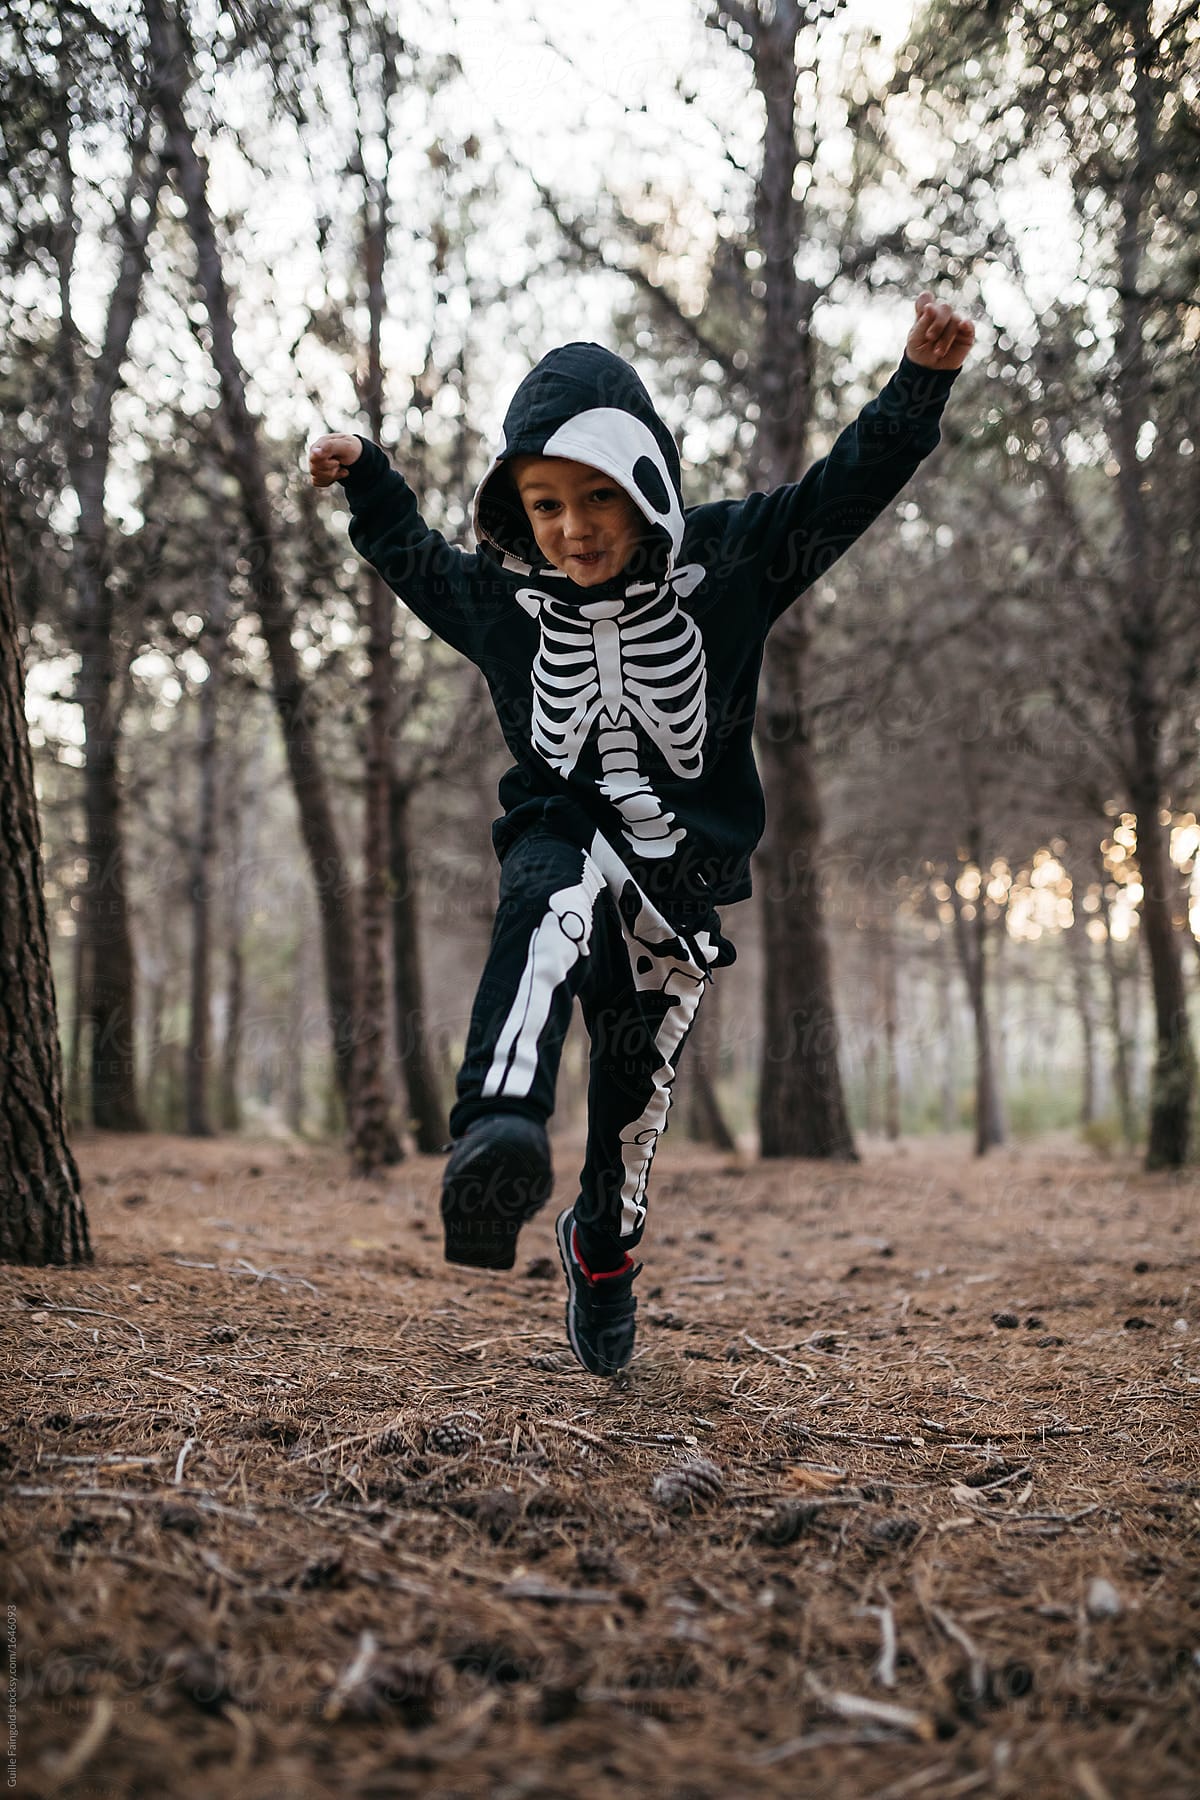 Boy in halloween costume in forest.